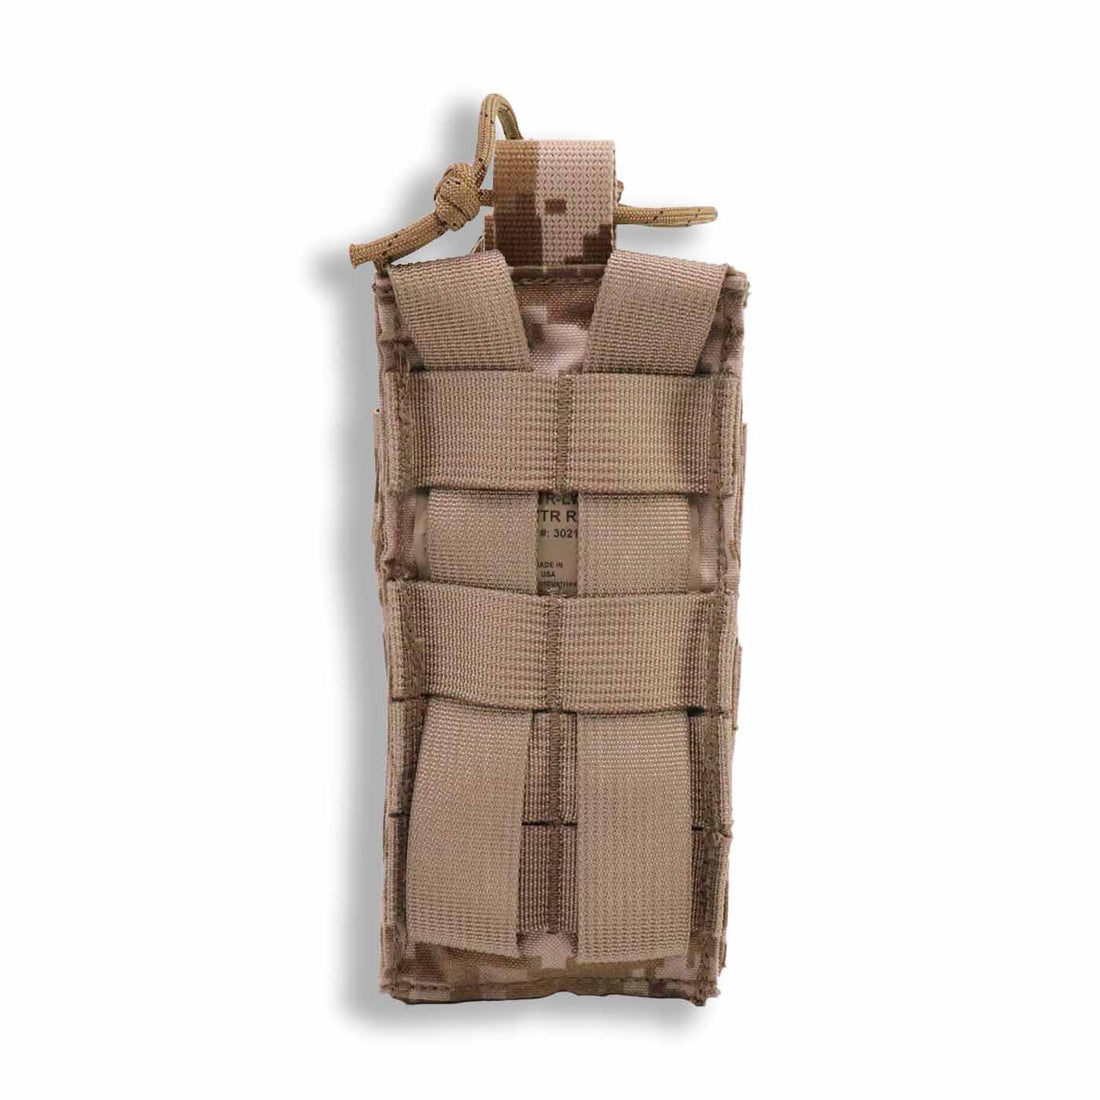 Gear - Pouches - Radio - Eagle Industries SOFLCS Lightweight MBITR Radio Pouch - MOLLE - AOR1